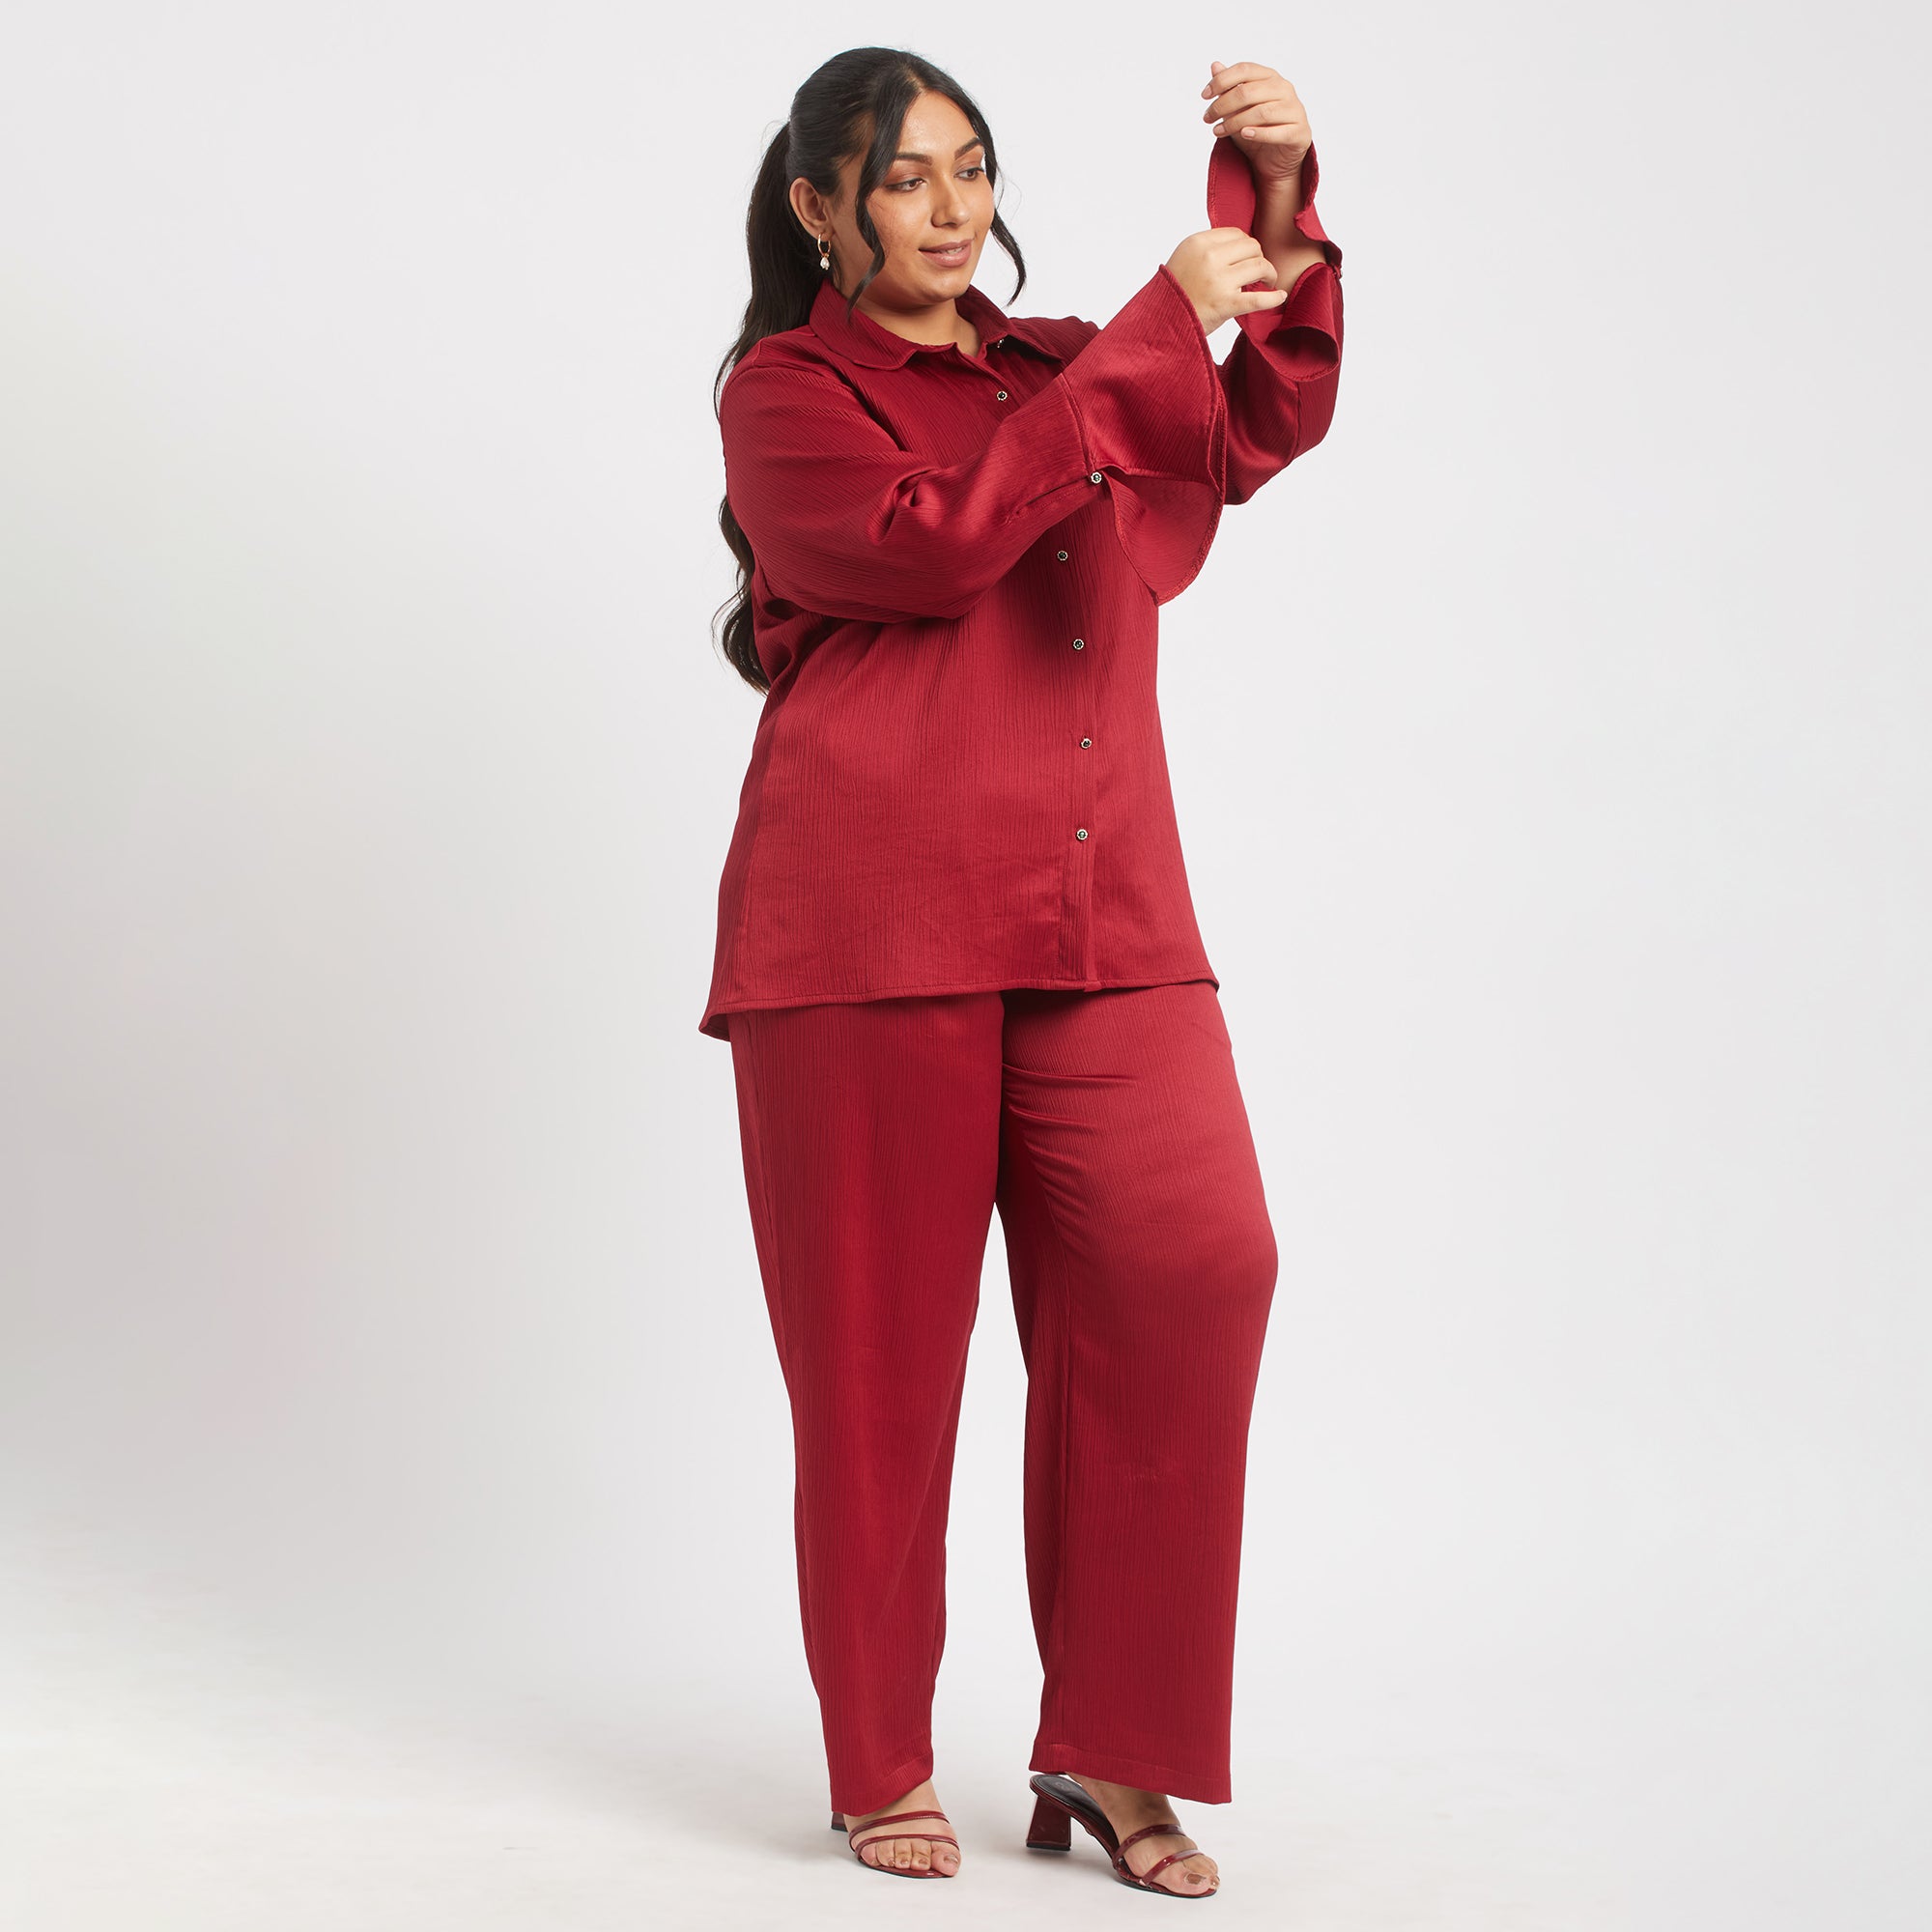 Women Co-ord Sets Plus Size - Calae